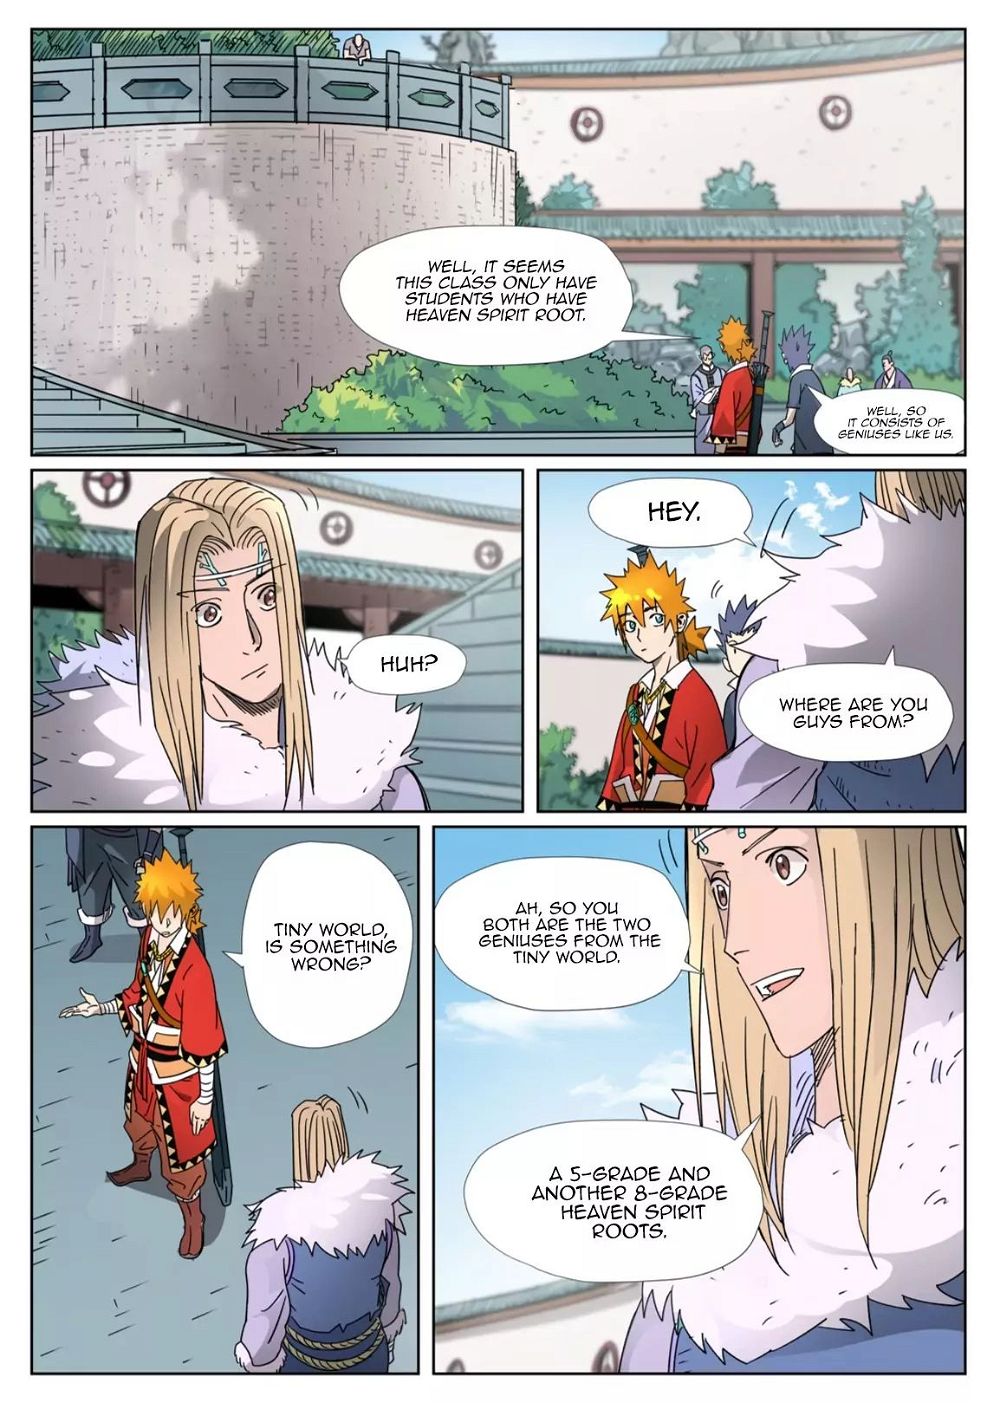 Tales of Demons and Gods Chapter 304.5 - Page 3